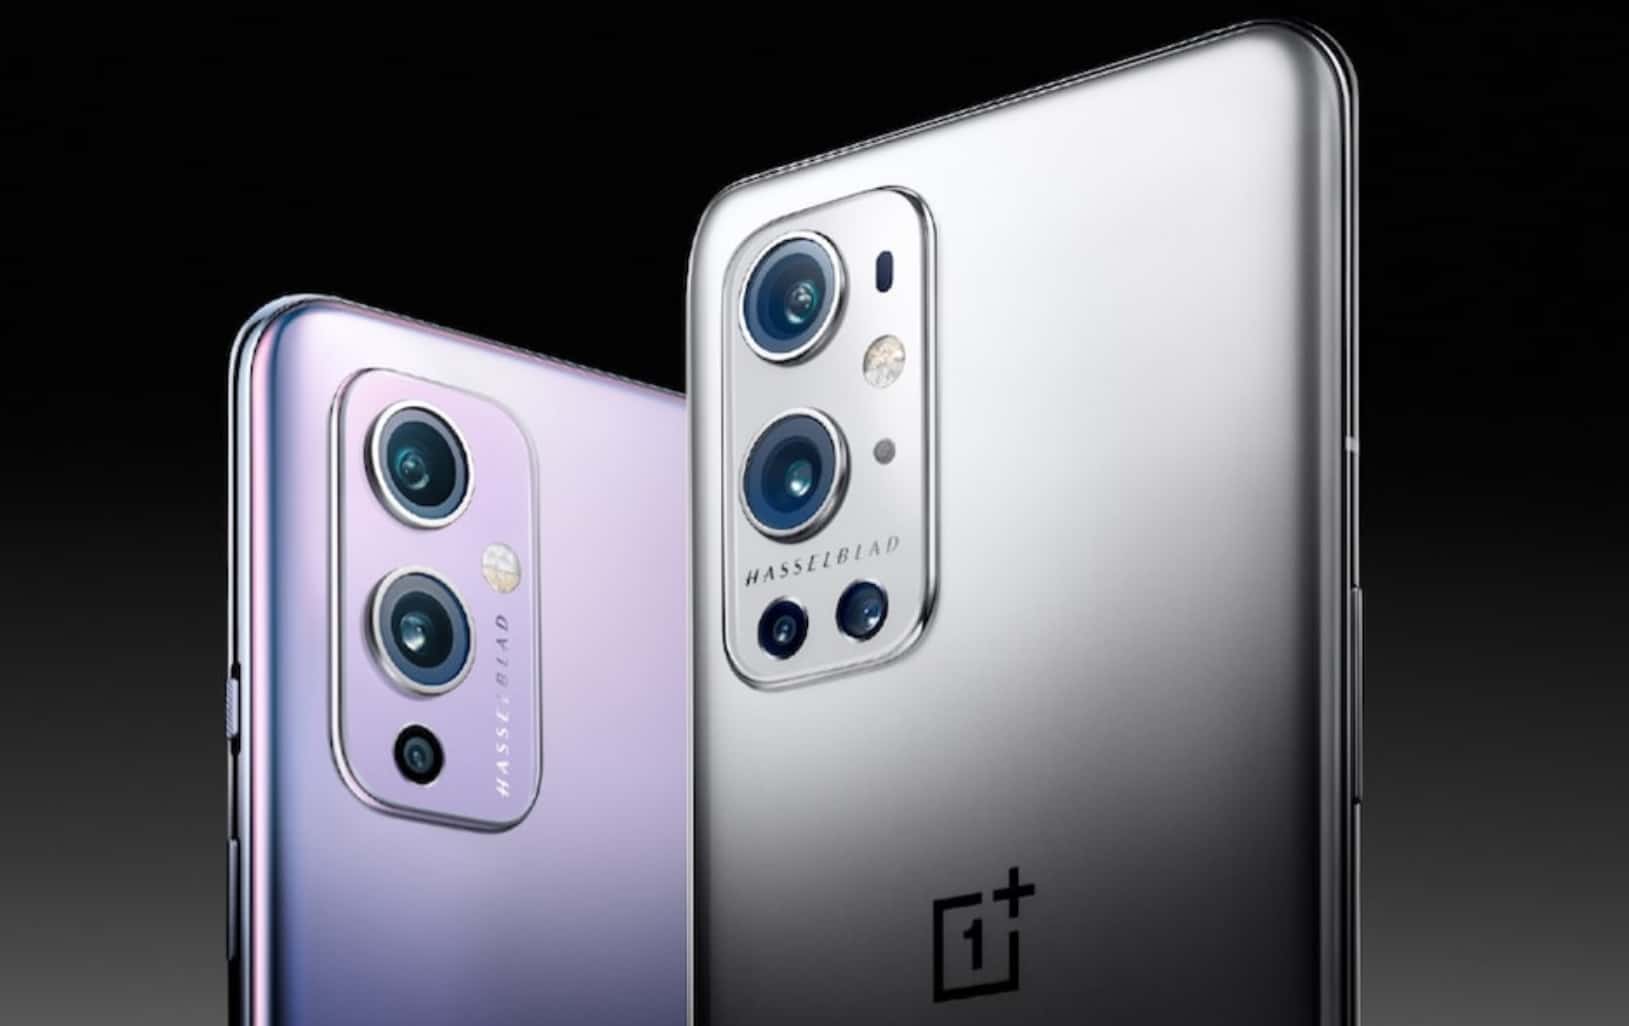 OnePlus 9 Pro Will Support 50W Fast Wireless Charging, Confirms OnePlus